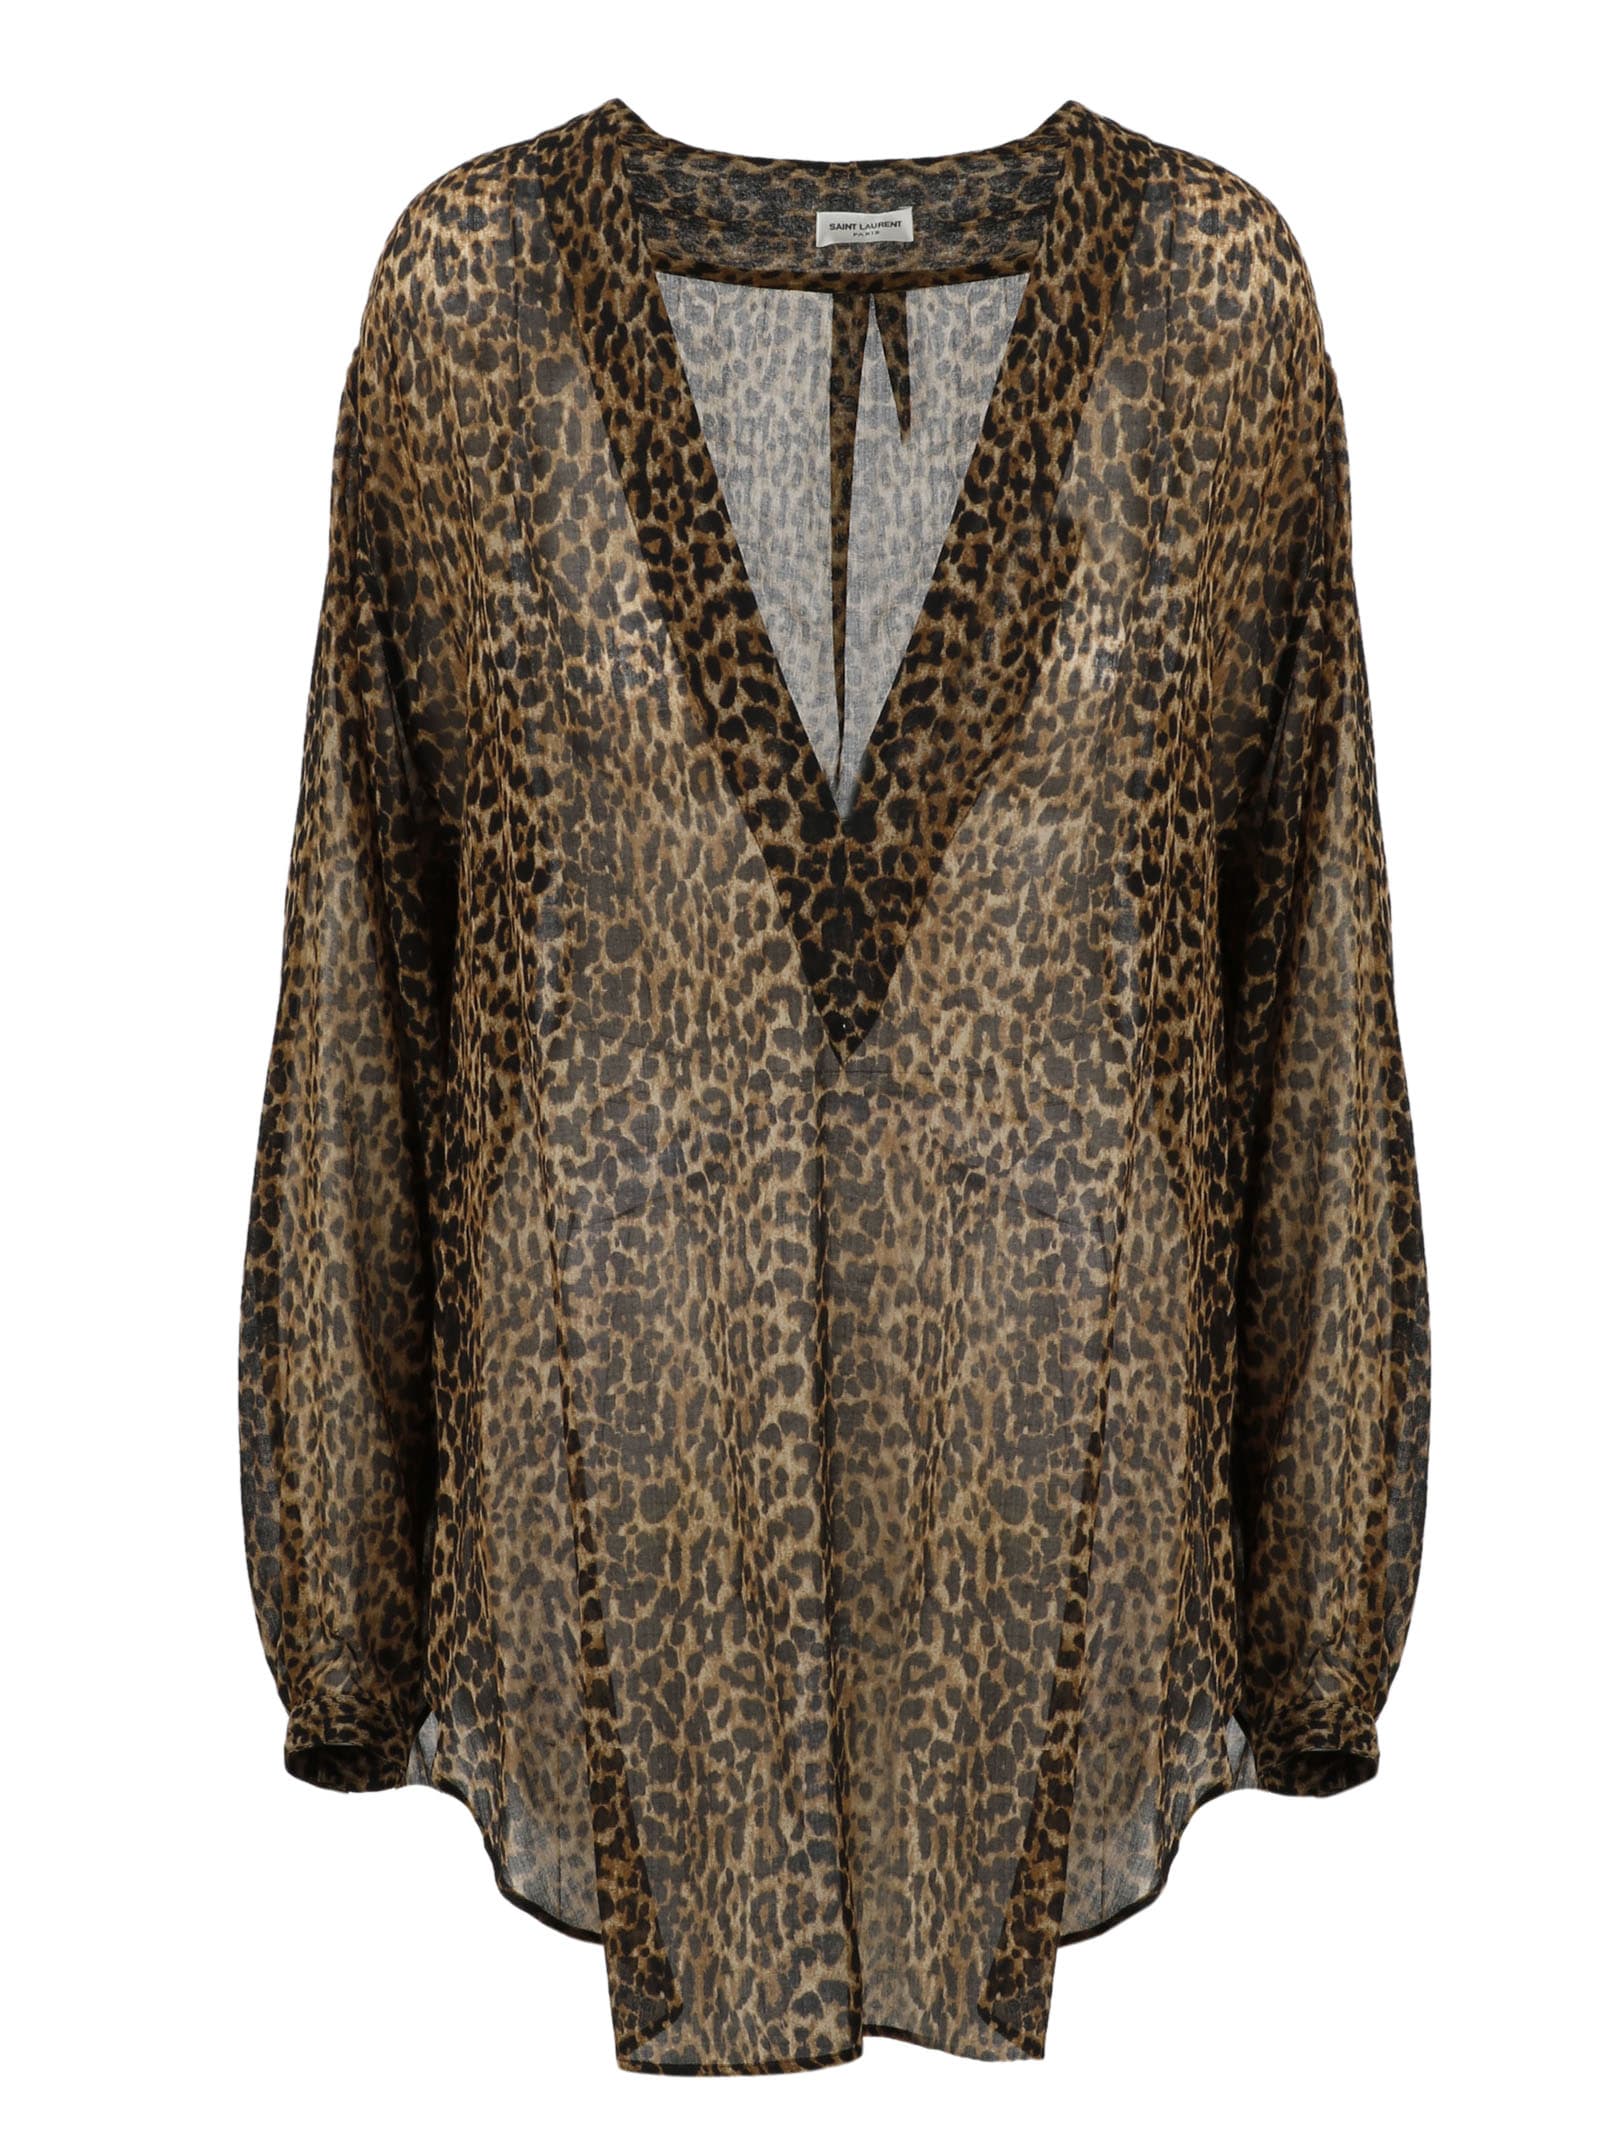 SAINT LAURENT BLOUSE WITH ANIMALIER MOTIF,624219 3Y200 9665 ROPE LIGHT BROWN